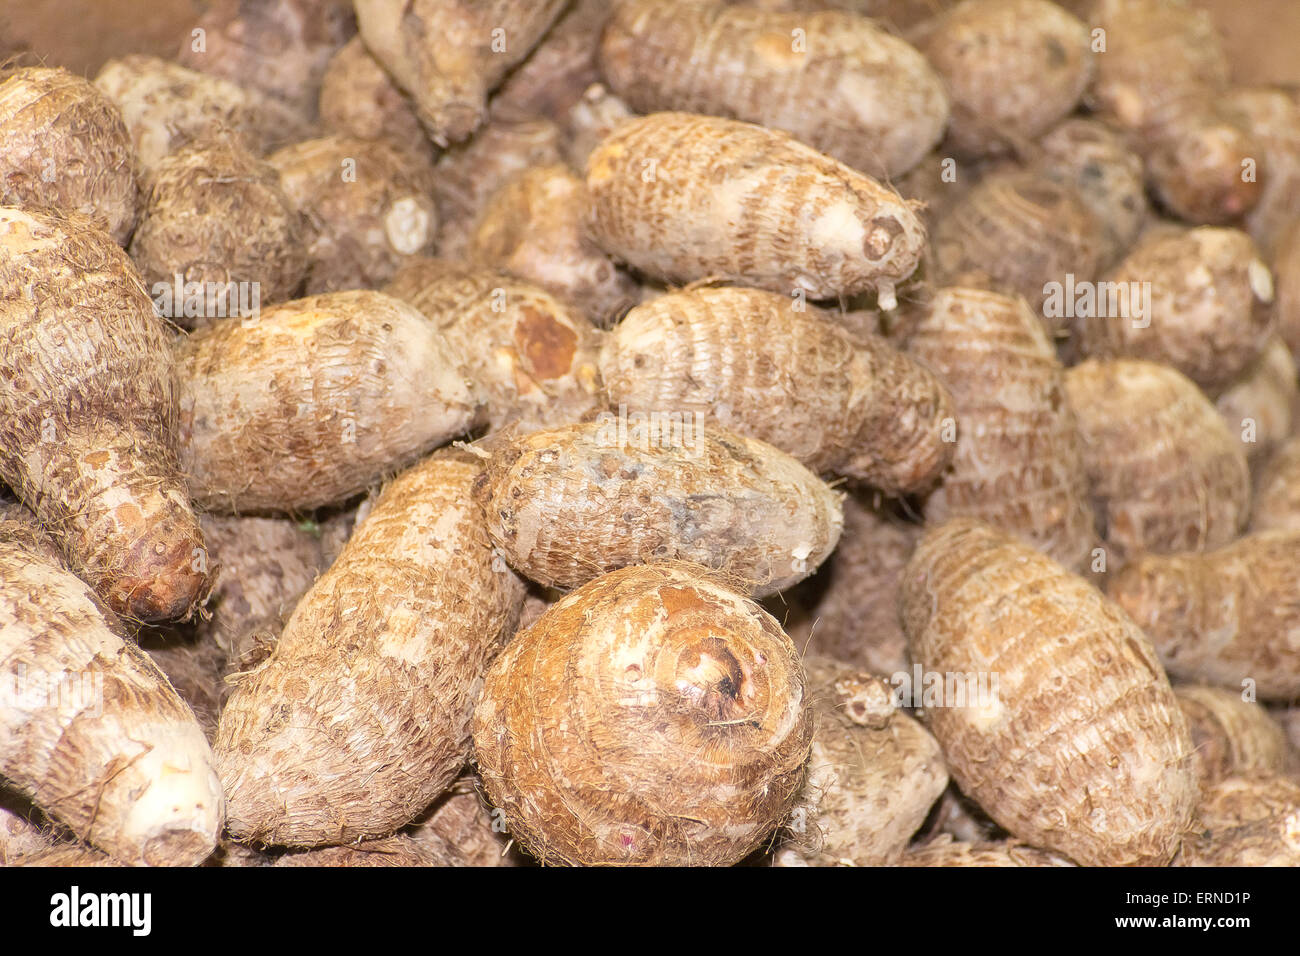 Pile of Satoimo potatoes or taro roots at an Asian market in Chinatown Stock Photo